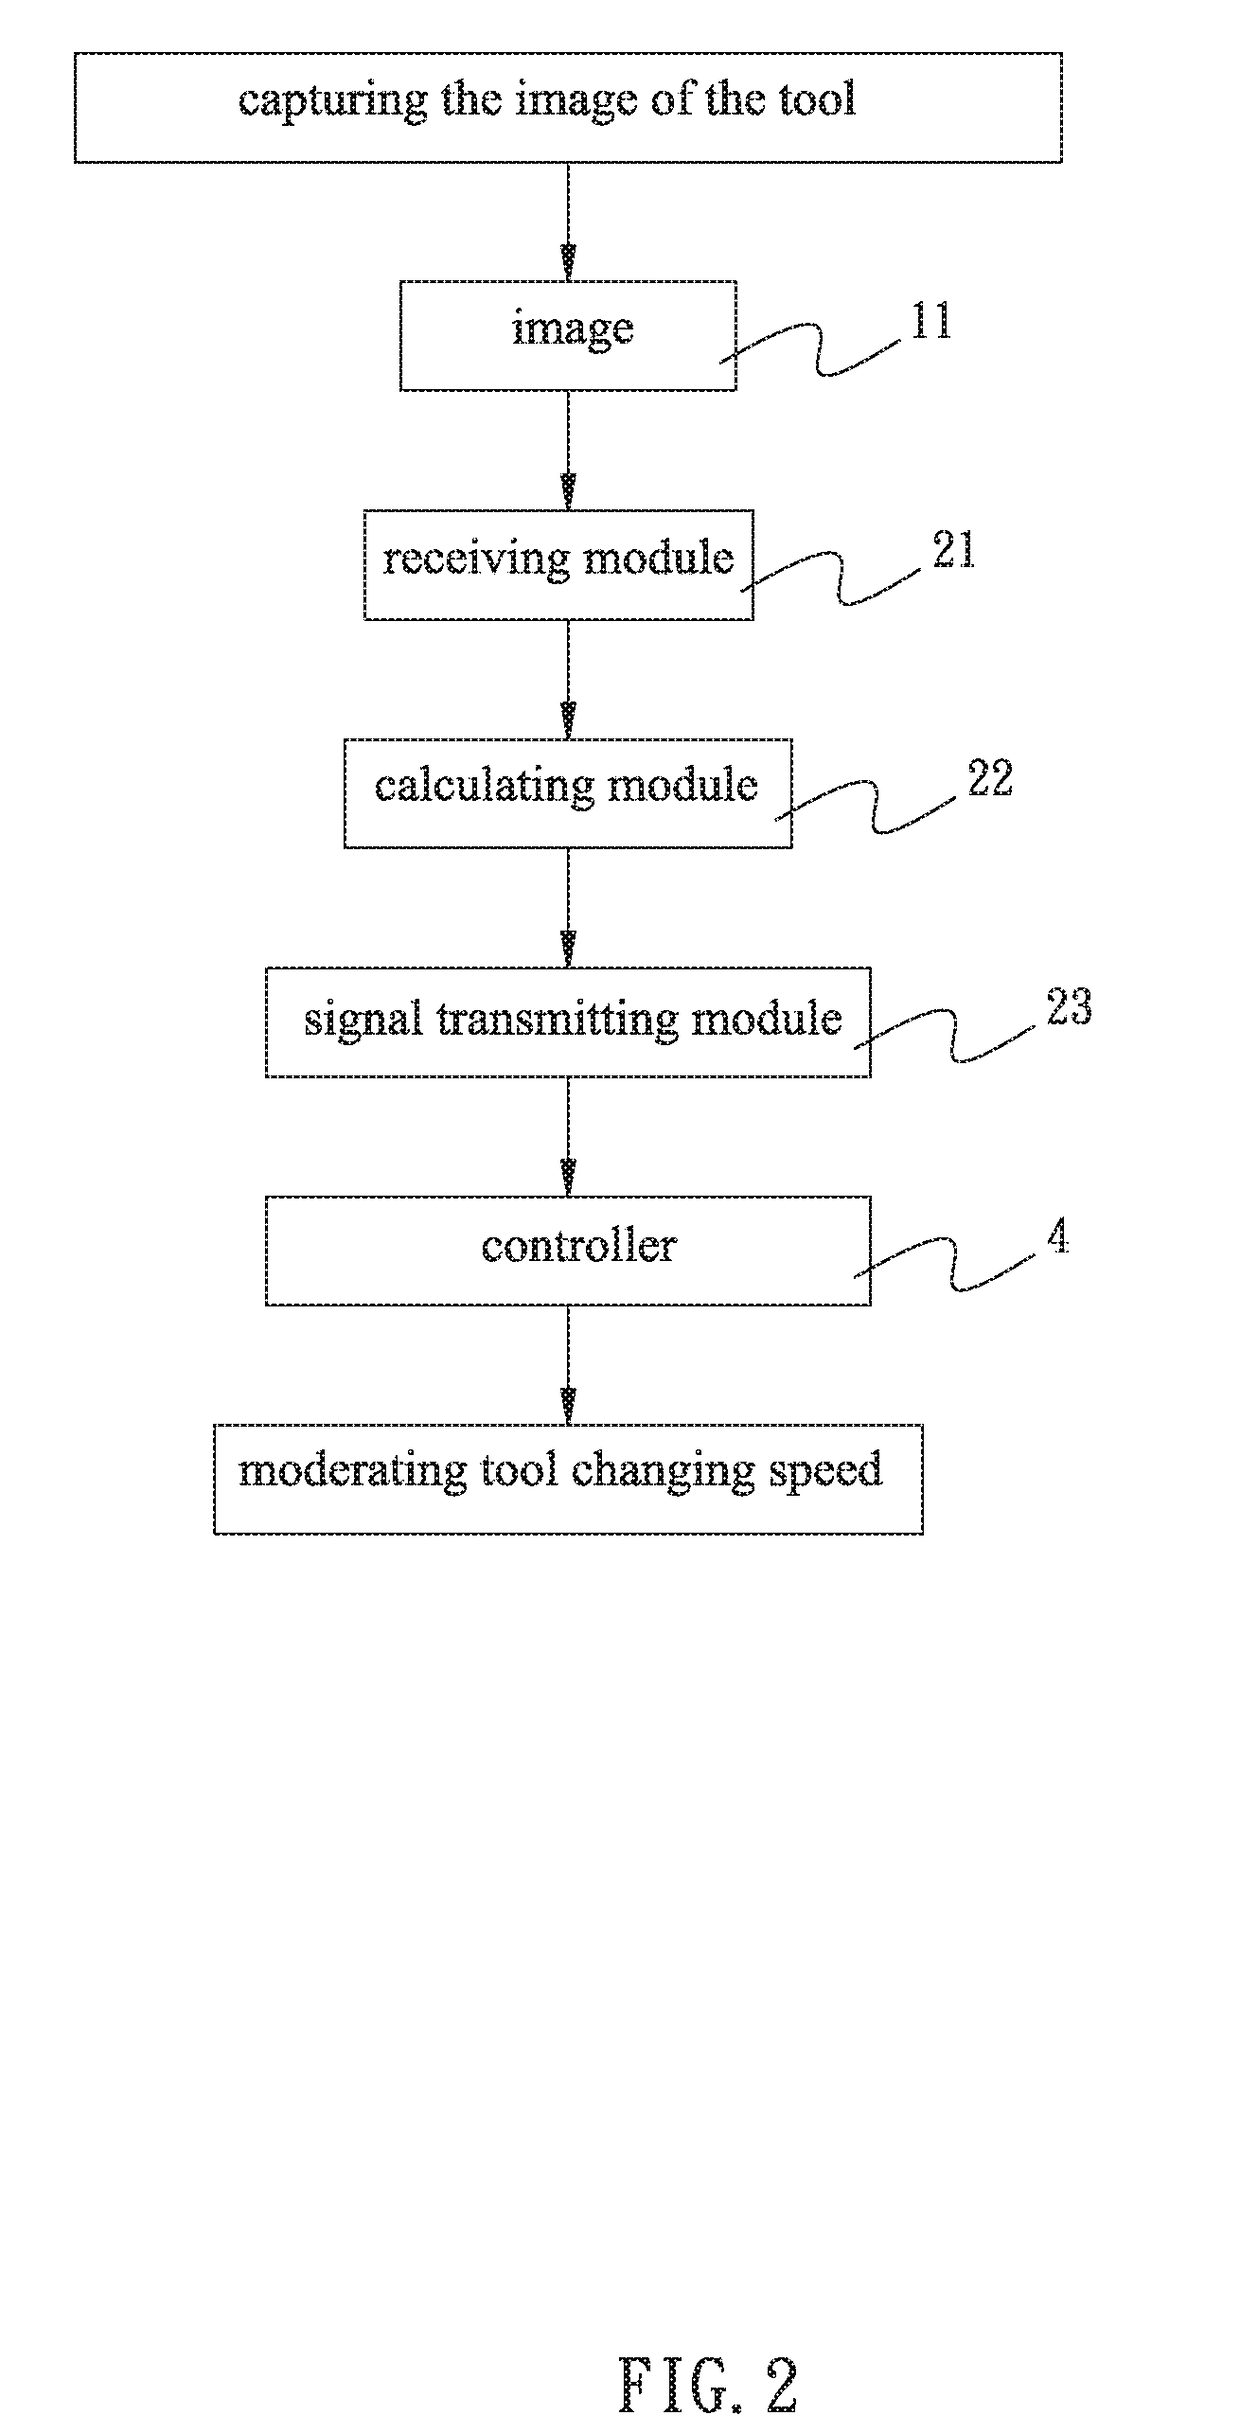 Intellectual automatic tool changer speed moderating system